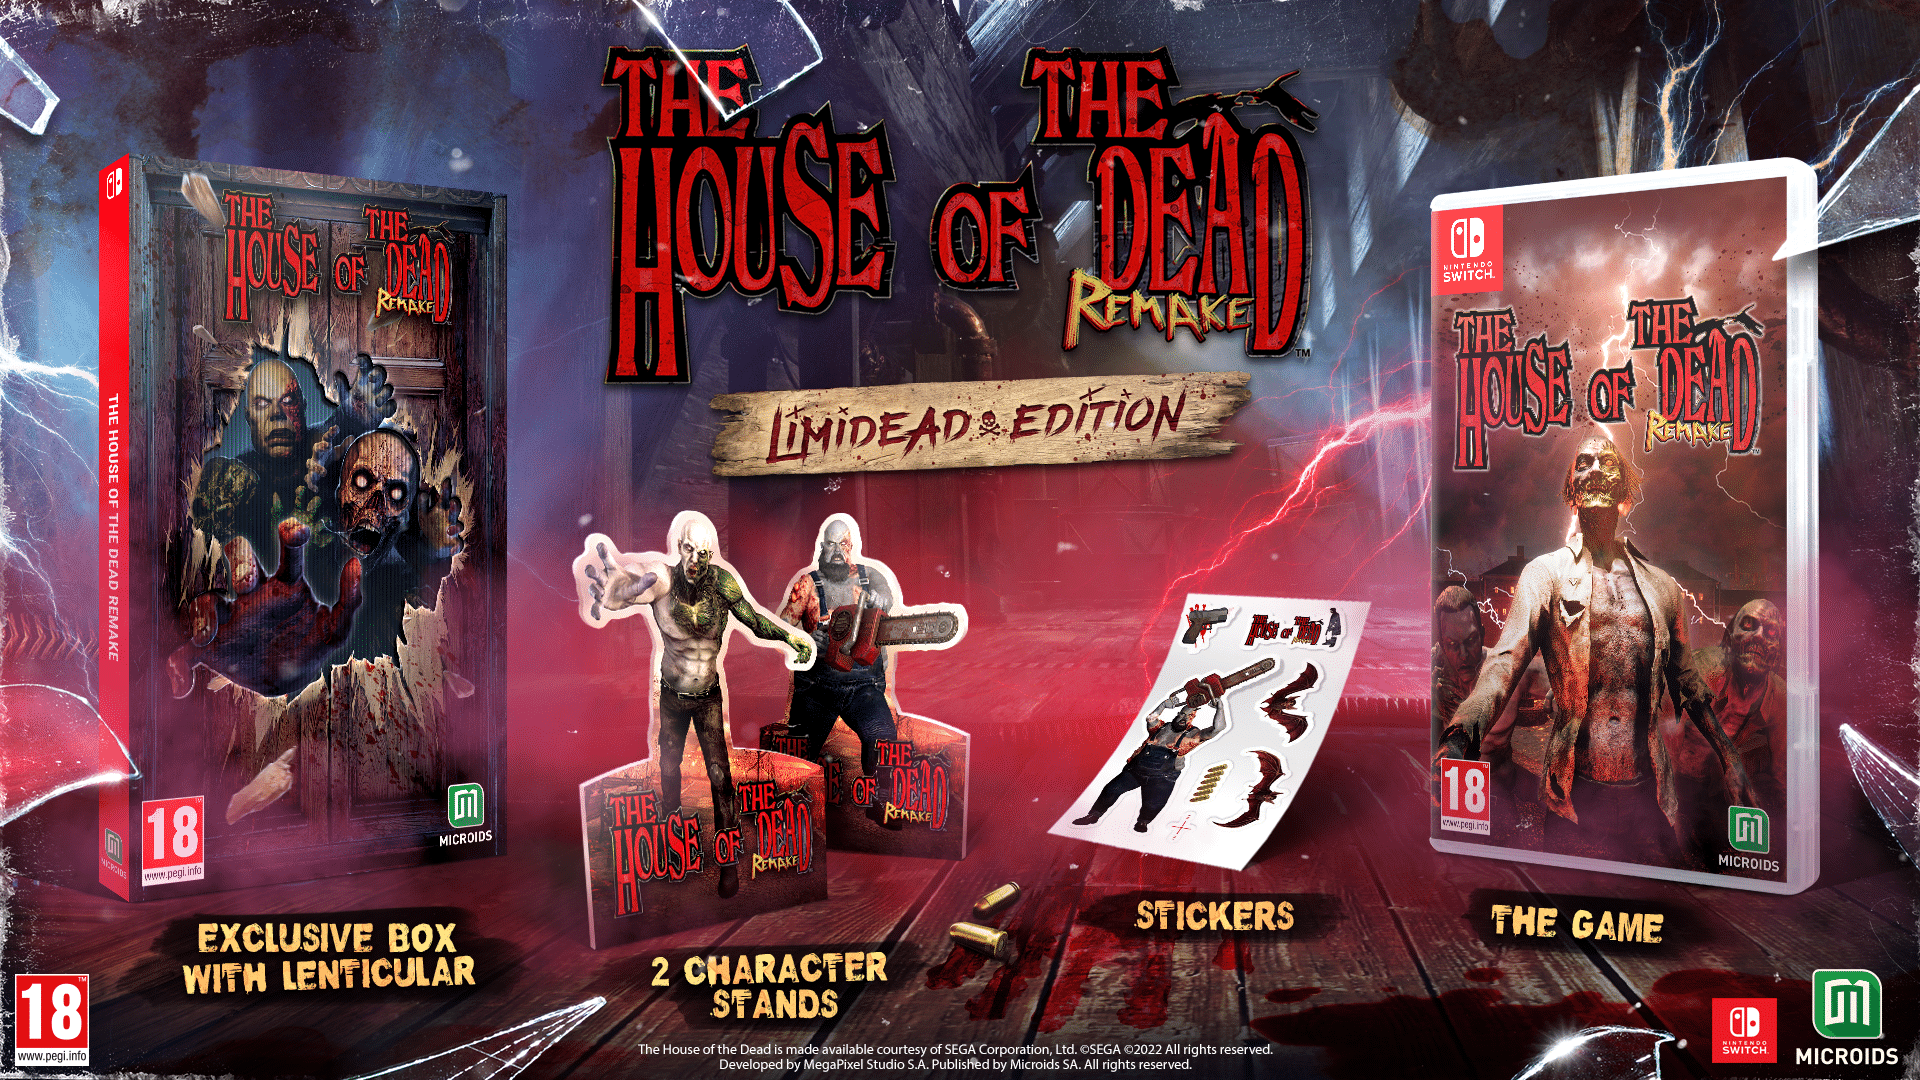 Arriva la Limidead Edition di The House Of The Dead: Remake thumbnail